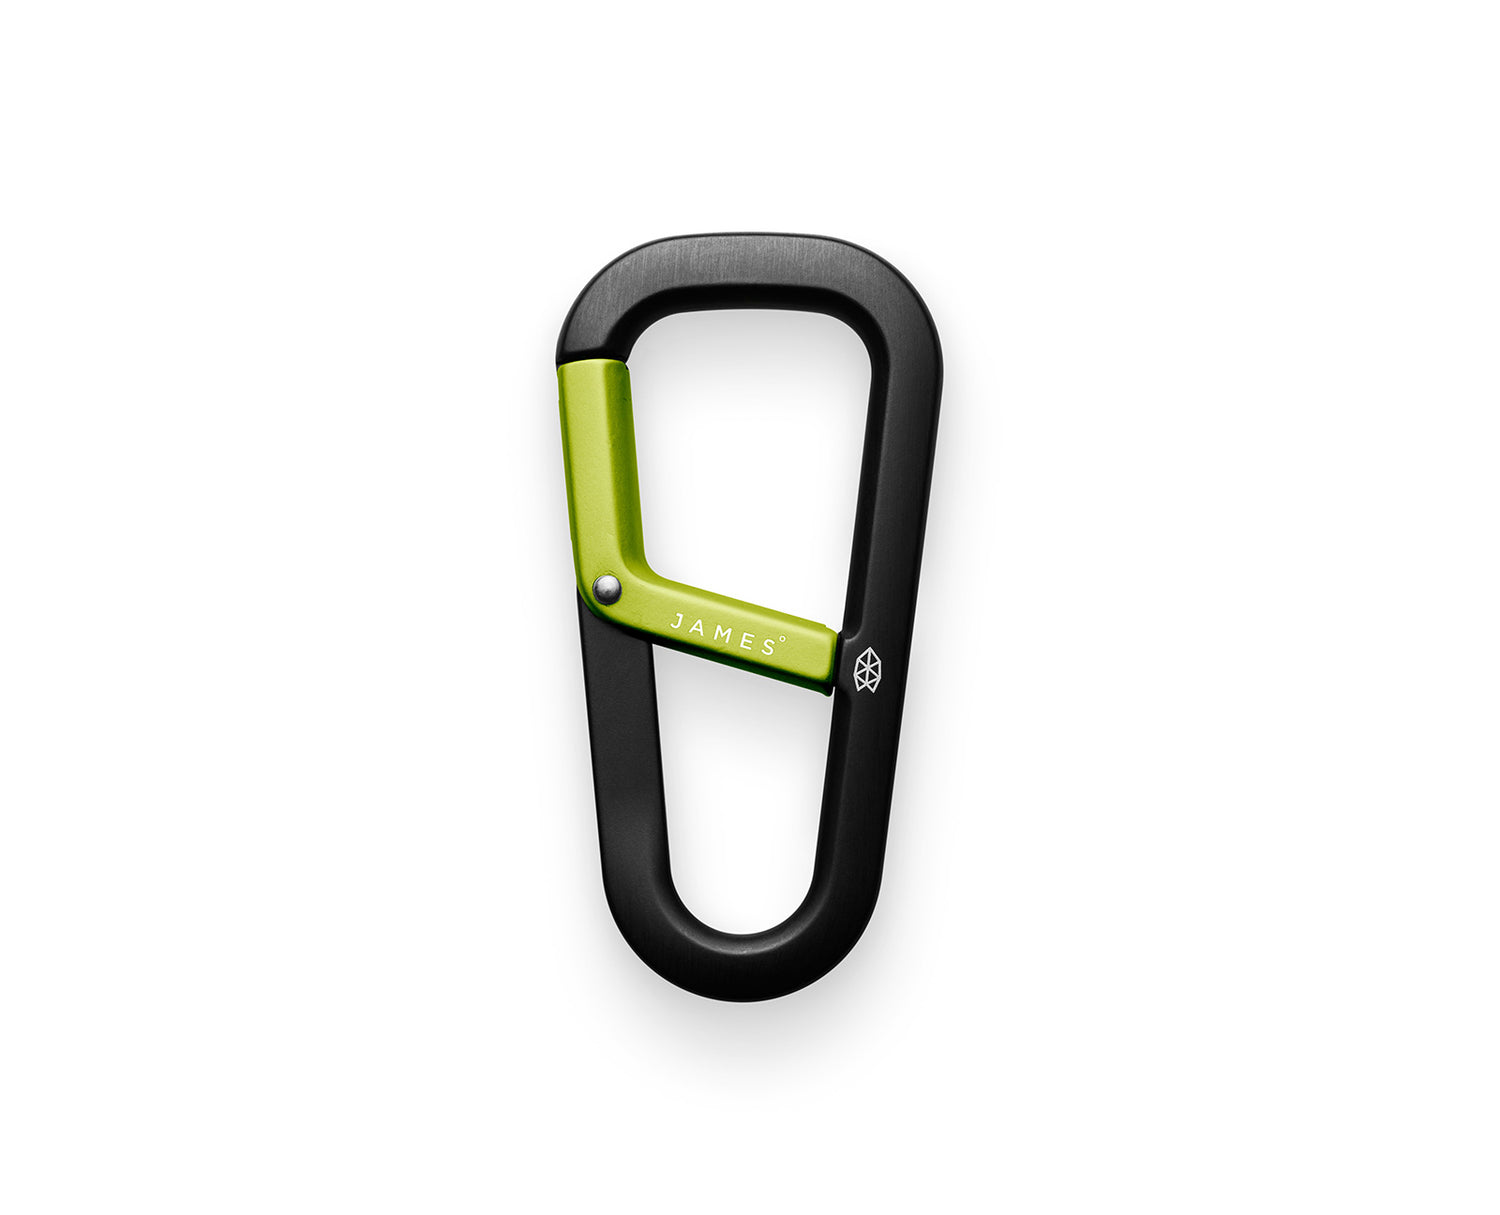 The Hardin carabiner in black and electric moss